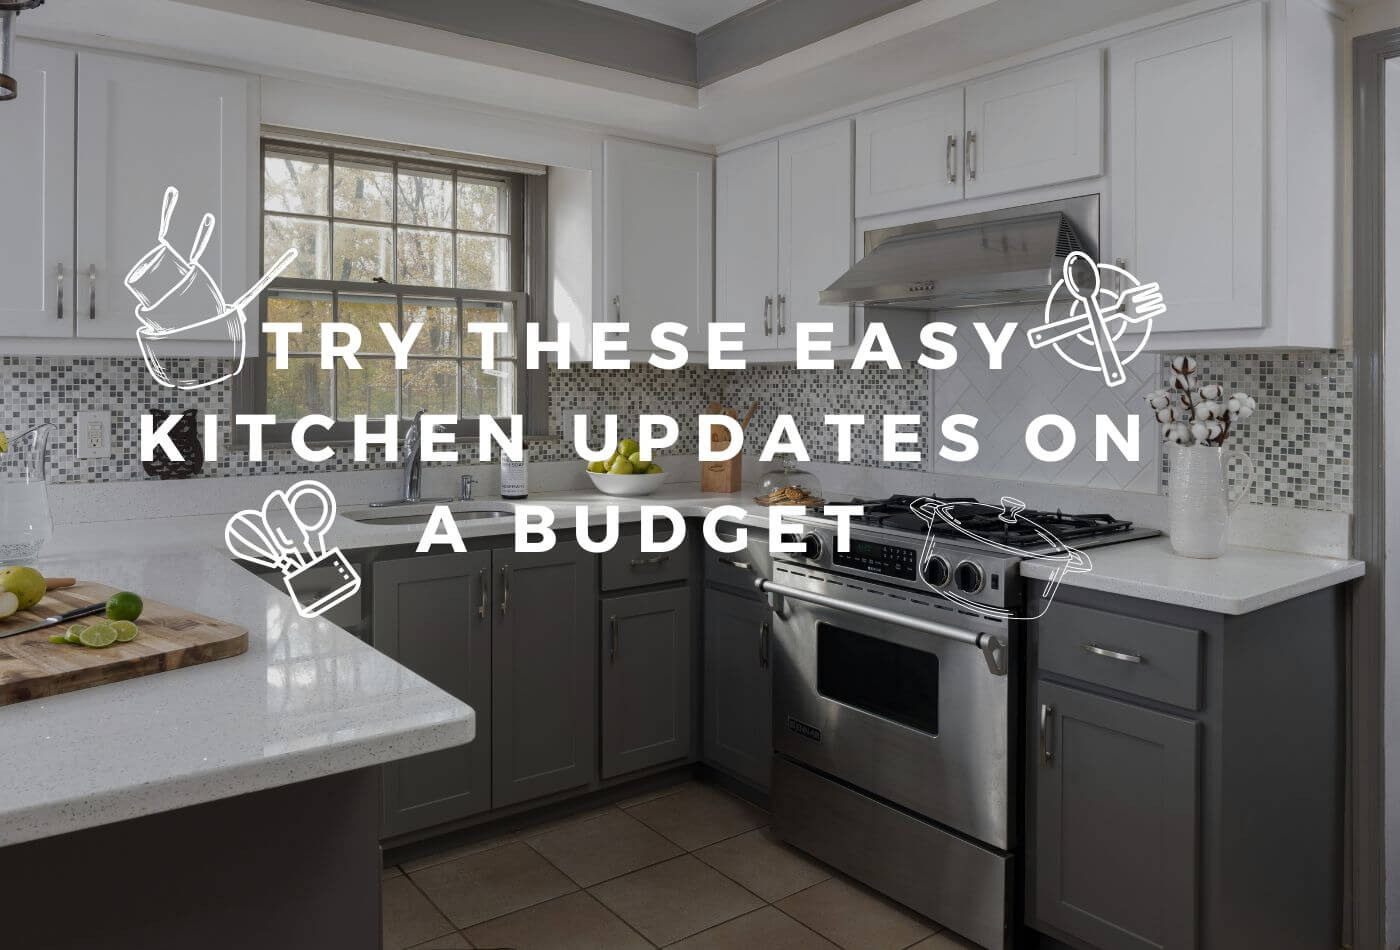 Try These Easy Kitchen Updates On A Budget; Get Yours